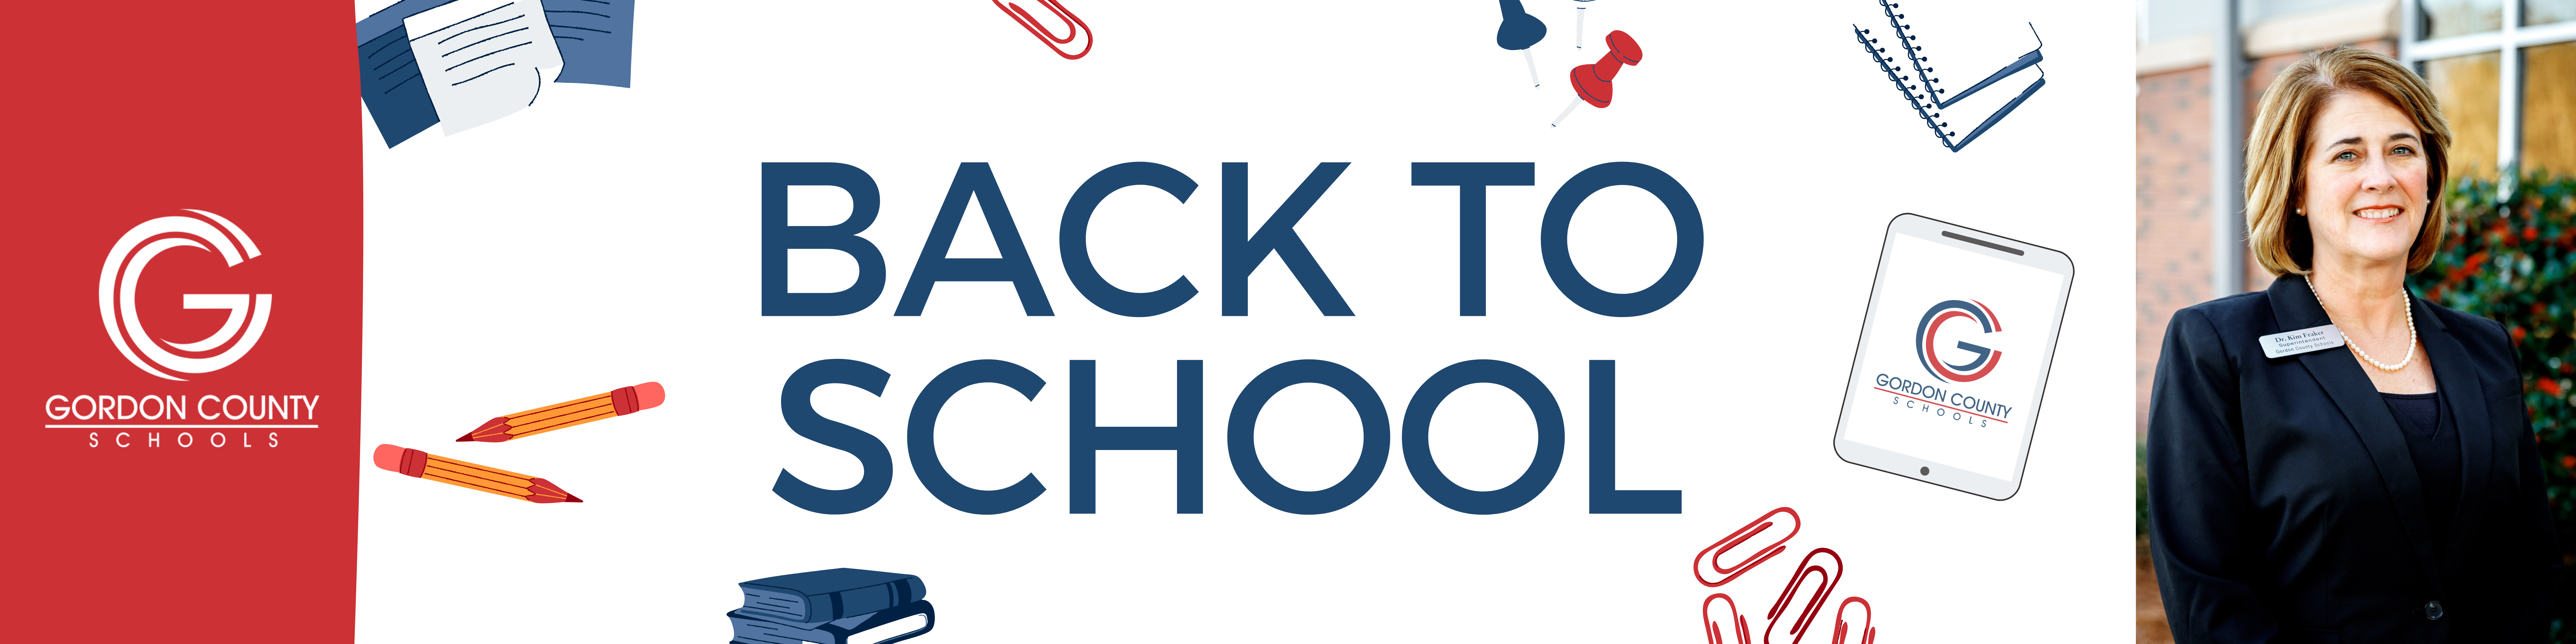 BACK TO SCHOOL BANNER - IMAGES OF SCHOOL SUPPLIES, GCS LOGO AND DR. FRAKER